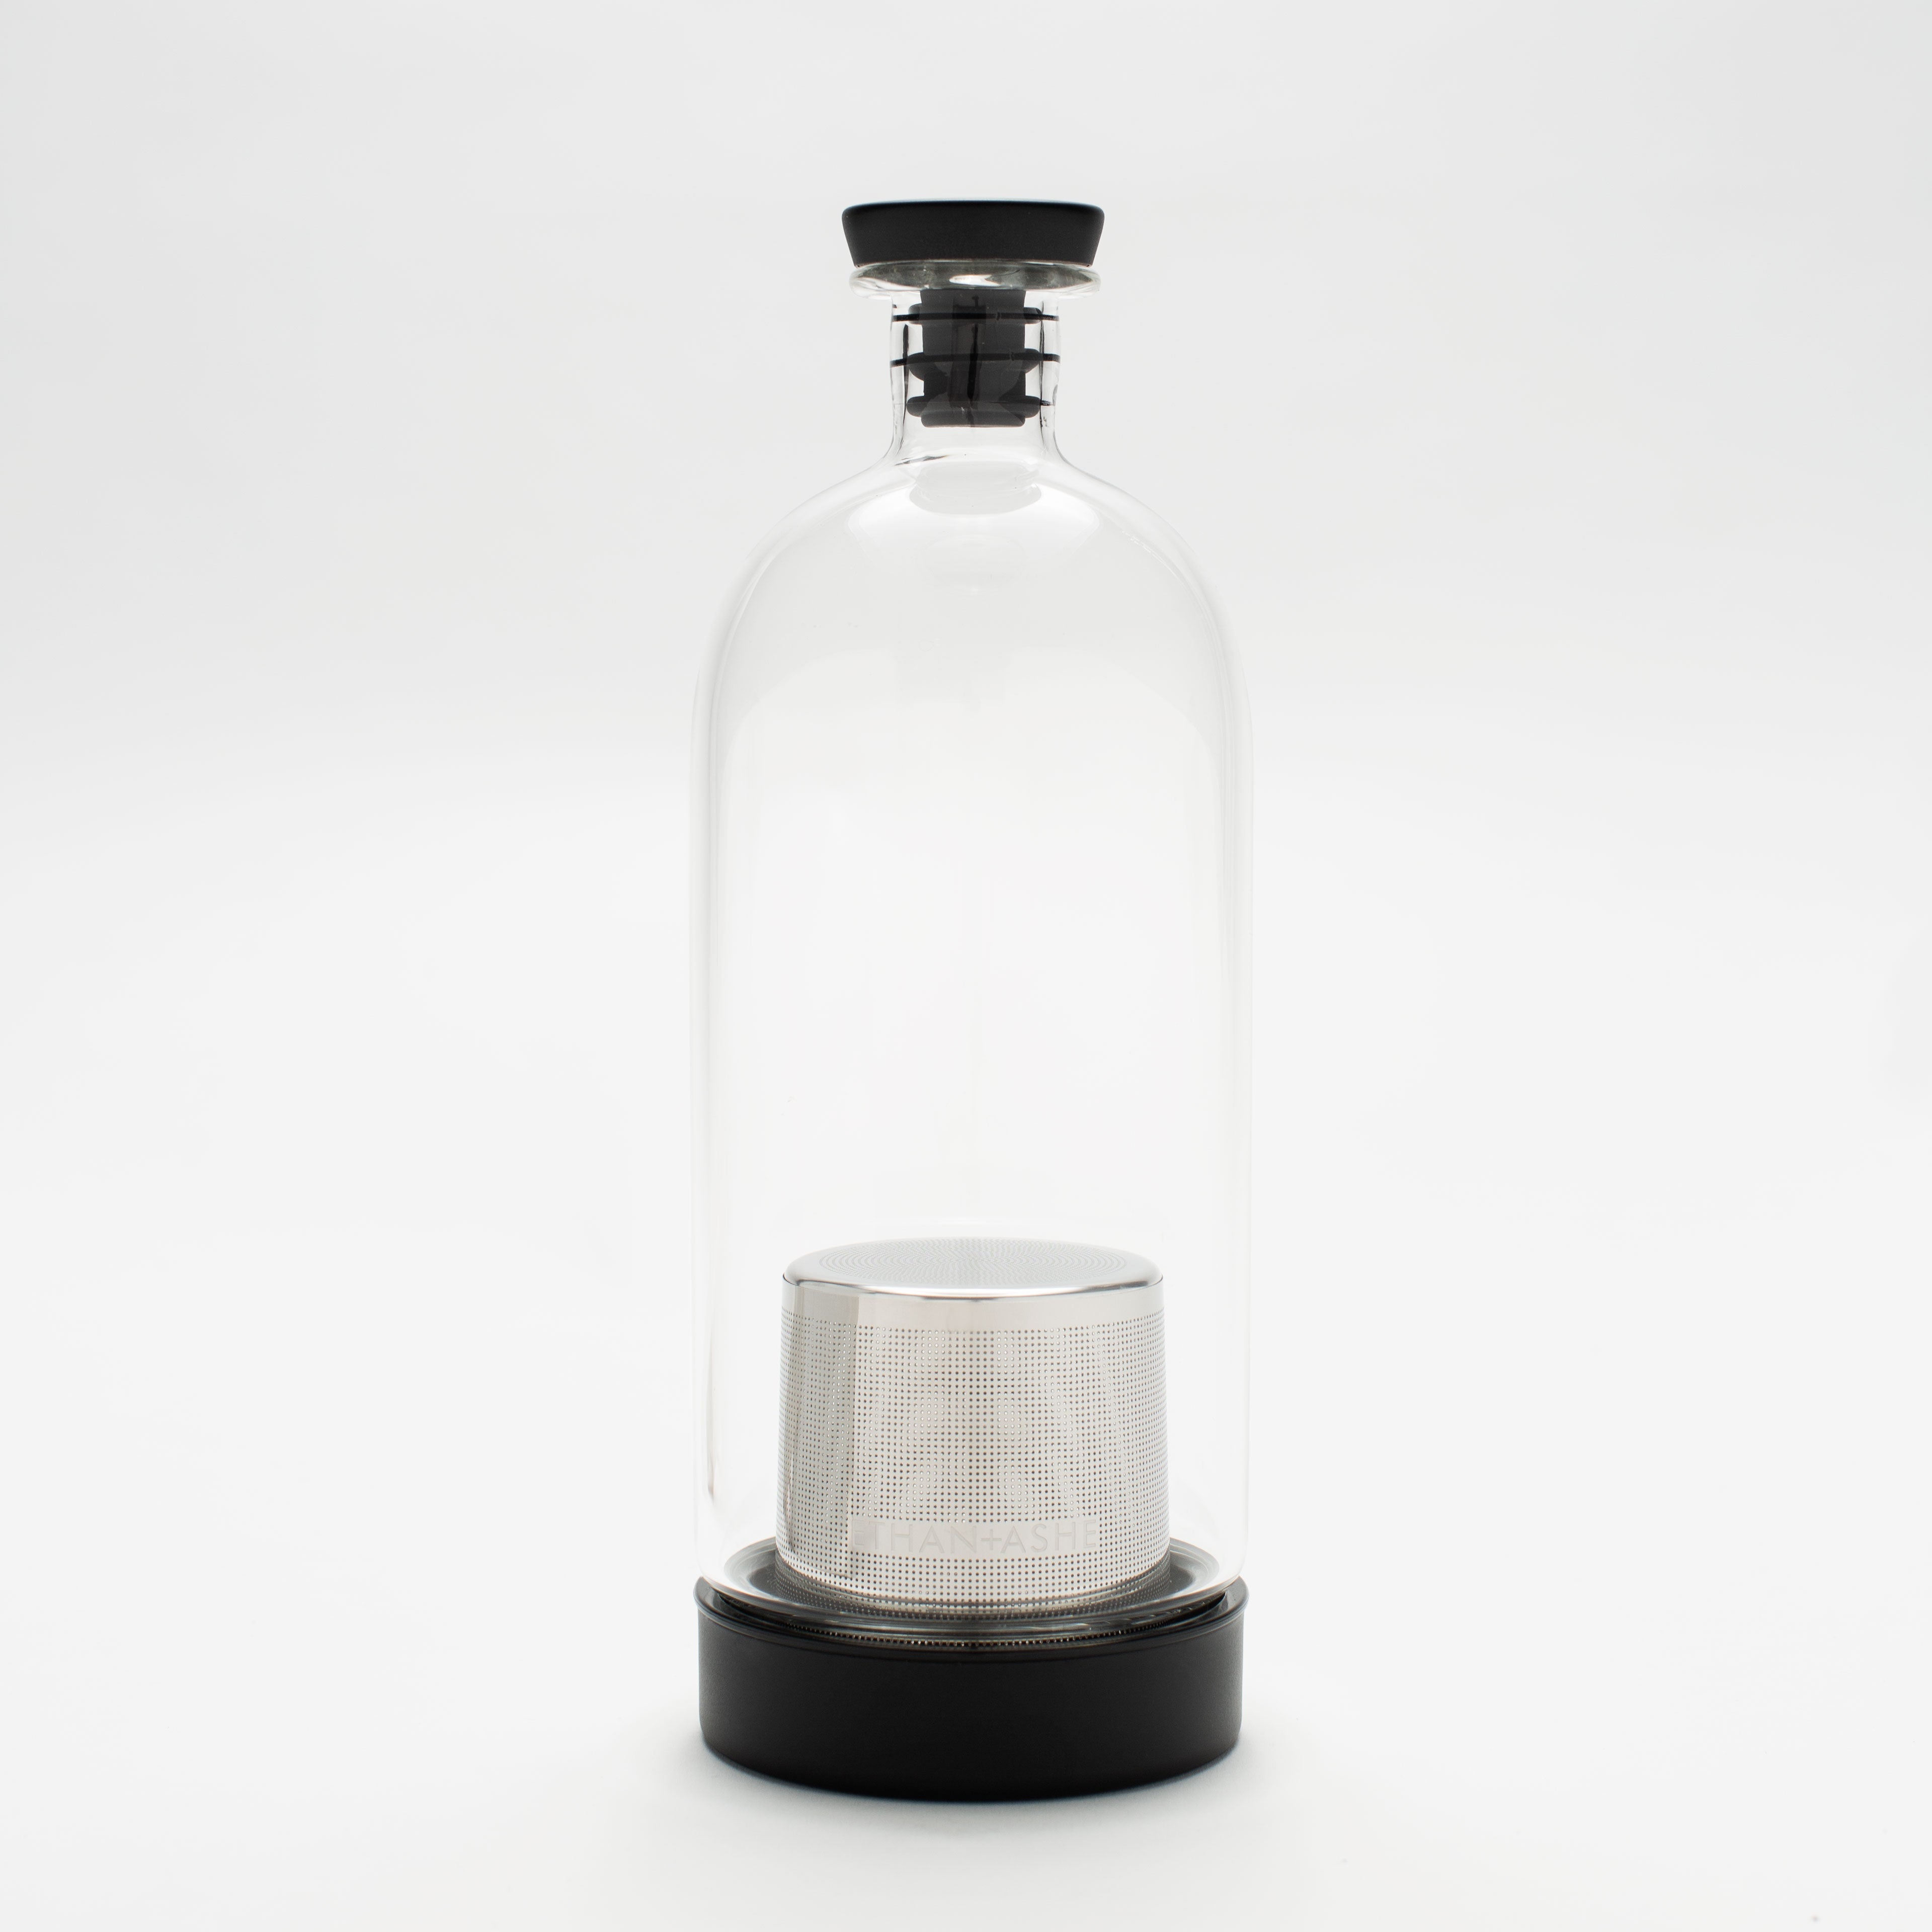  Alkemista Infusion Vessel by Ethan+Ashe Ethan+Ashe Perfumarie